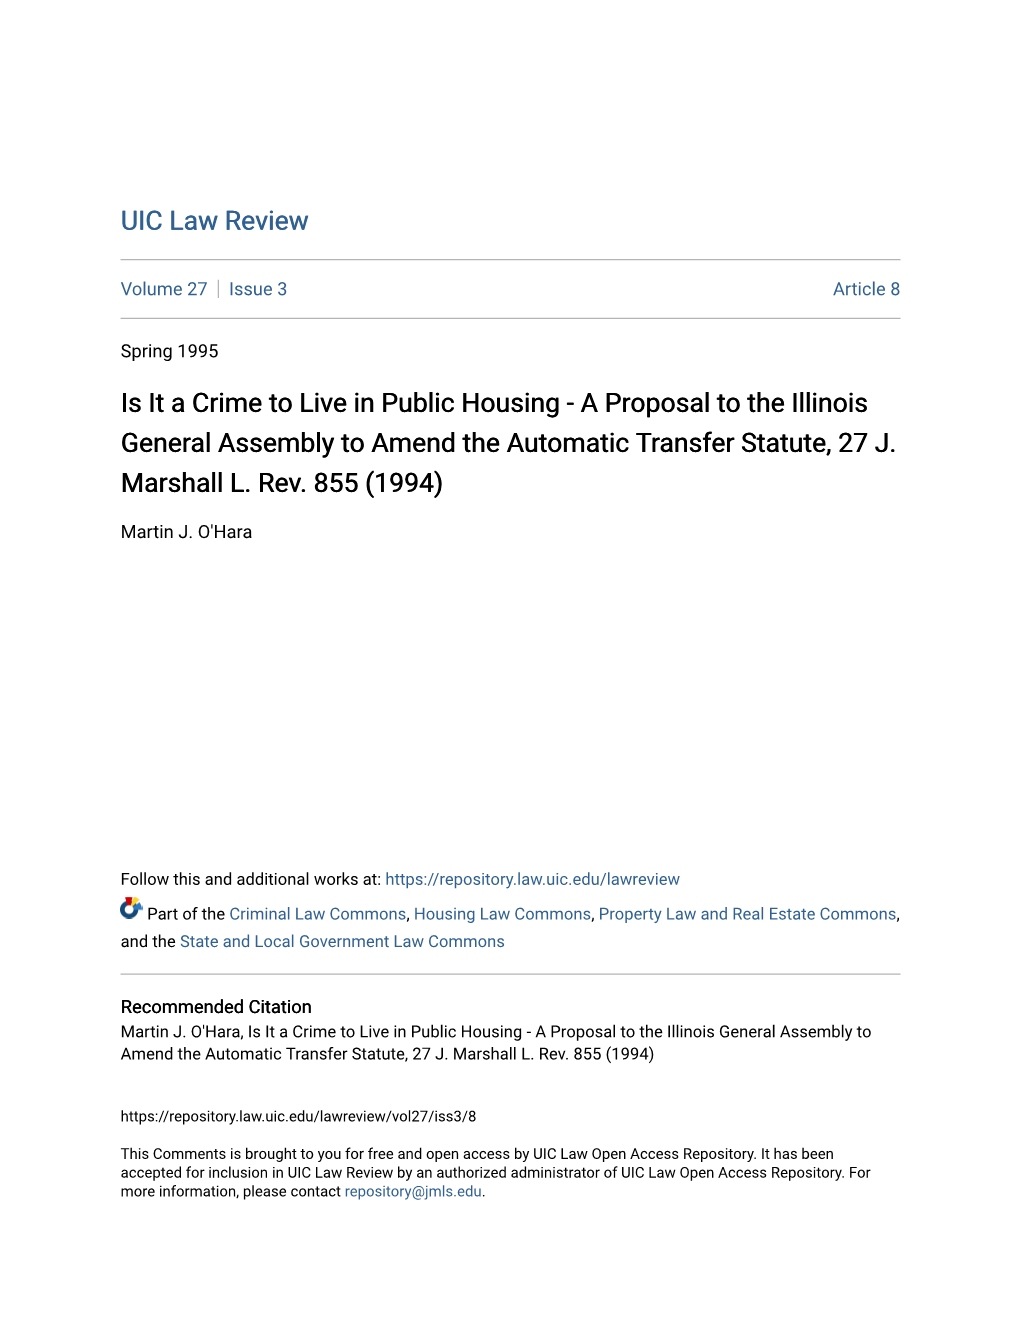 Is It a Crime to Live in Public Housing - a Proposal to the Illinois General Assembly to Amend the Automatic Transfer Statute, 27 J